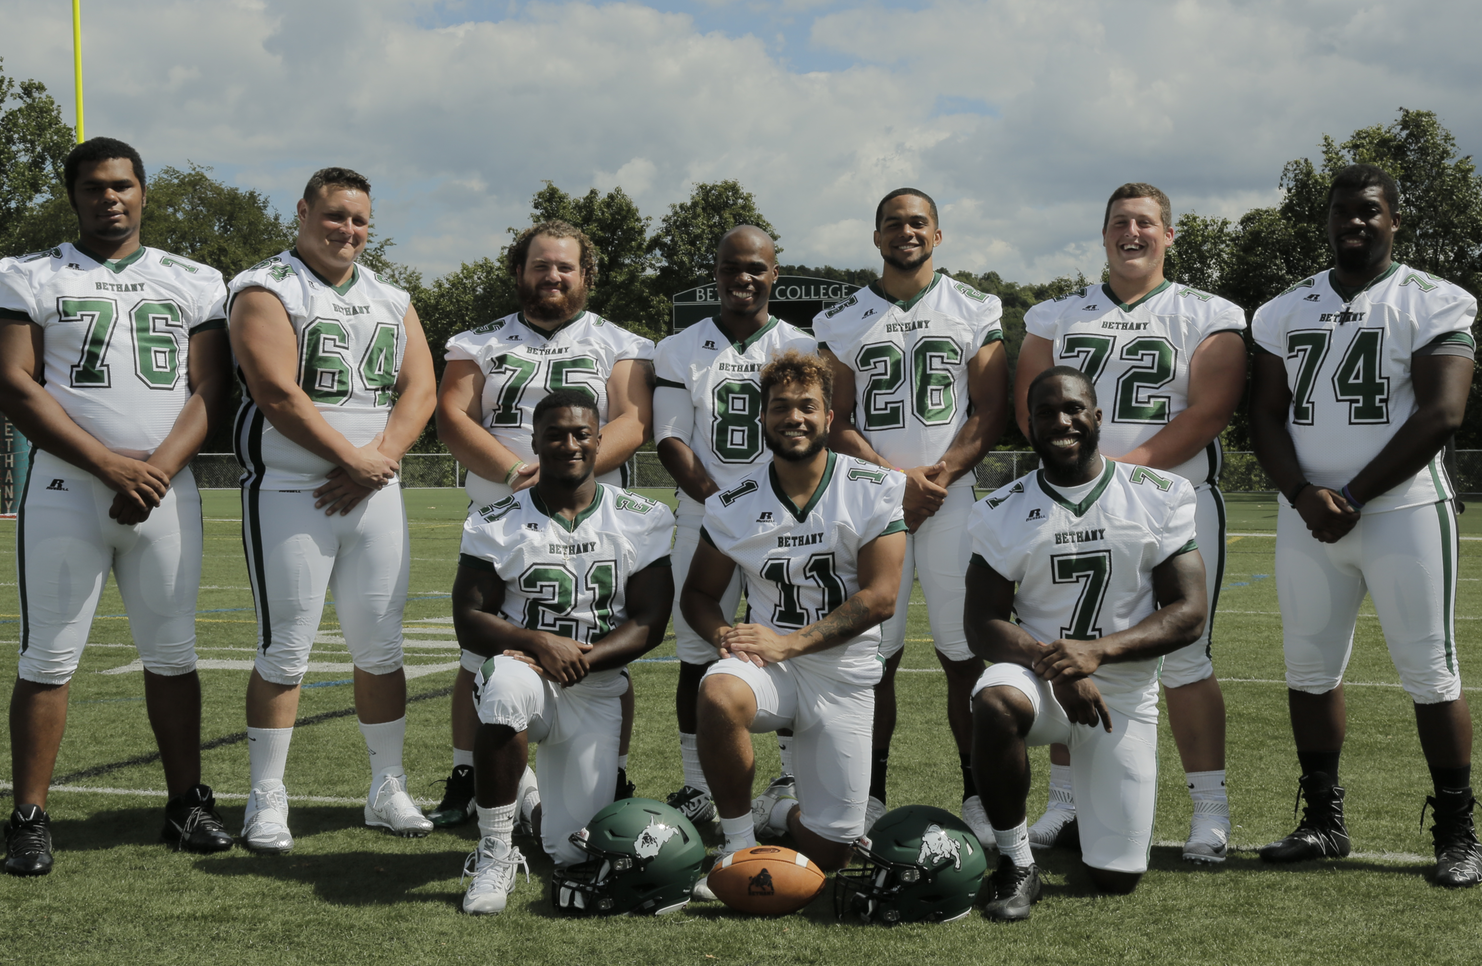 Bethany to host Saint Vincent on Senior Day